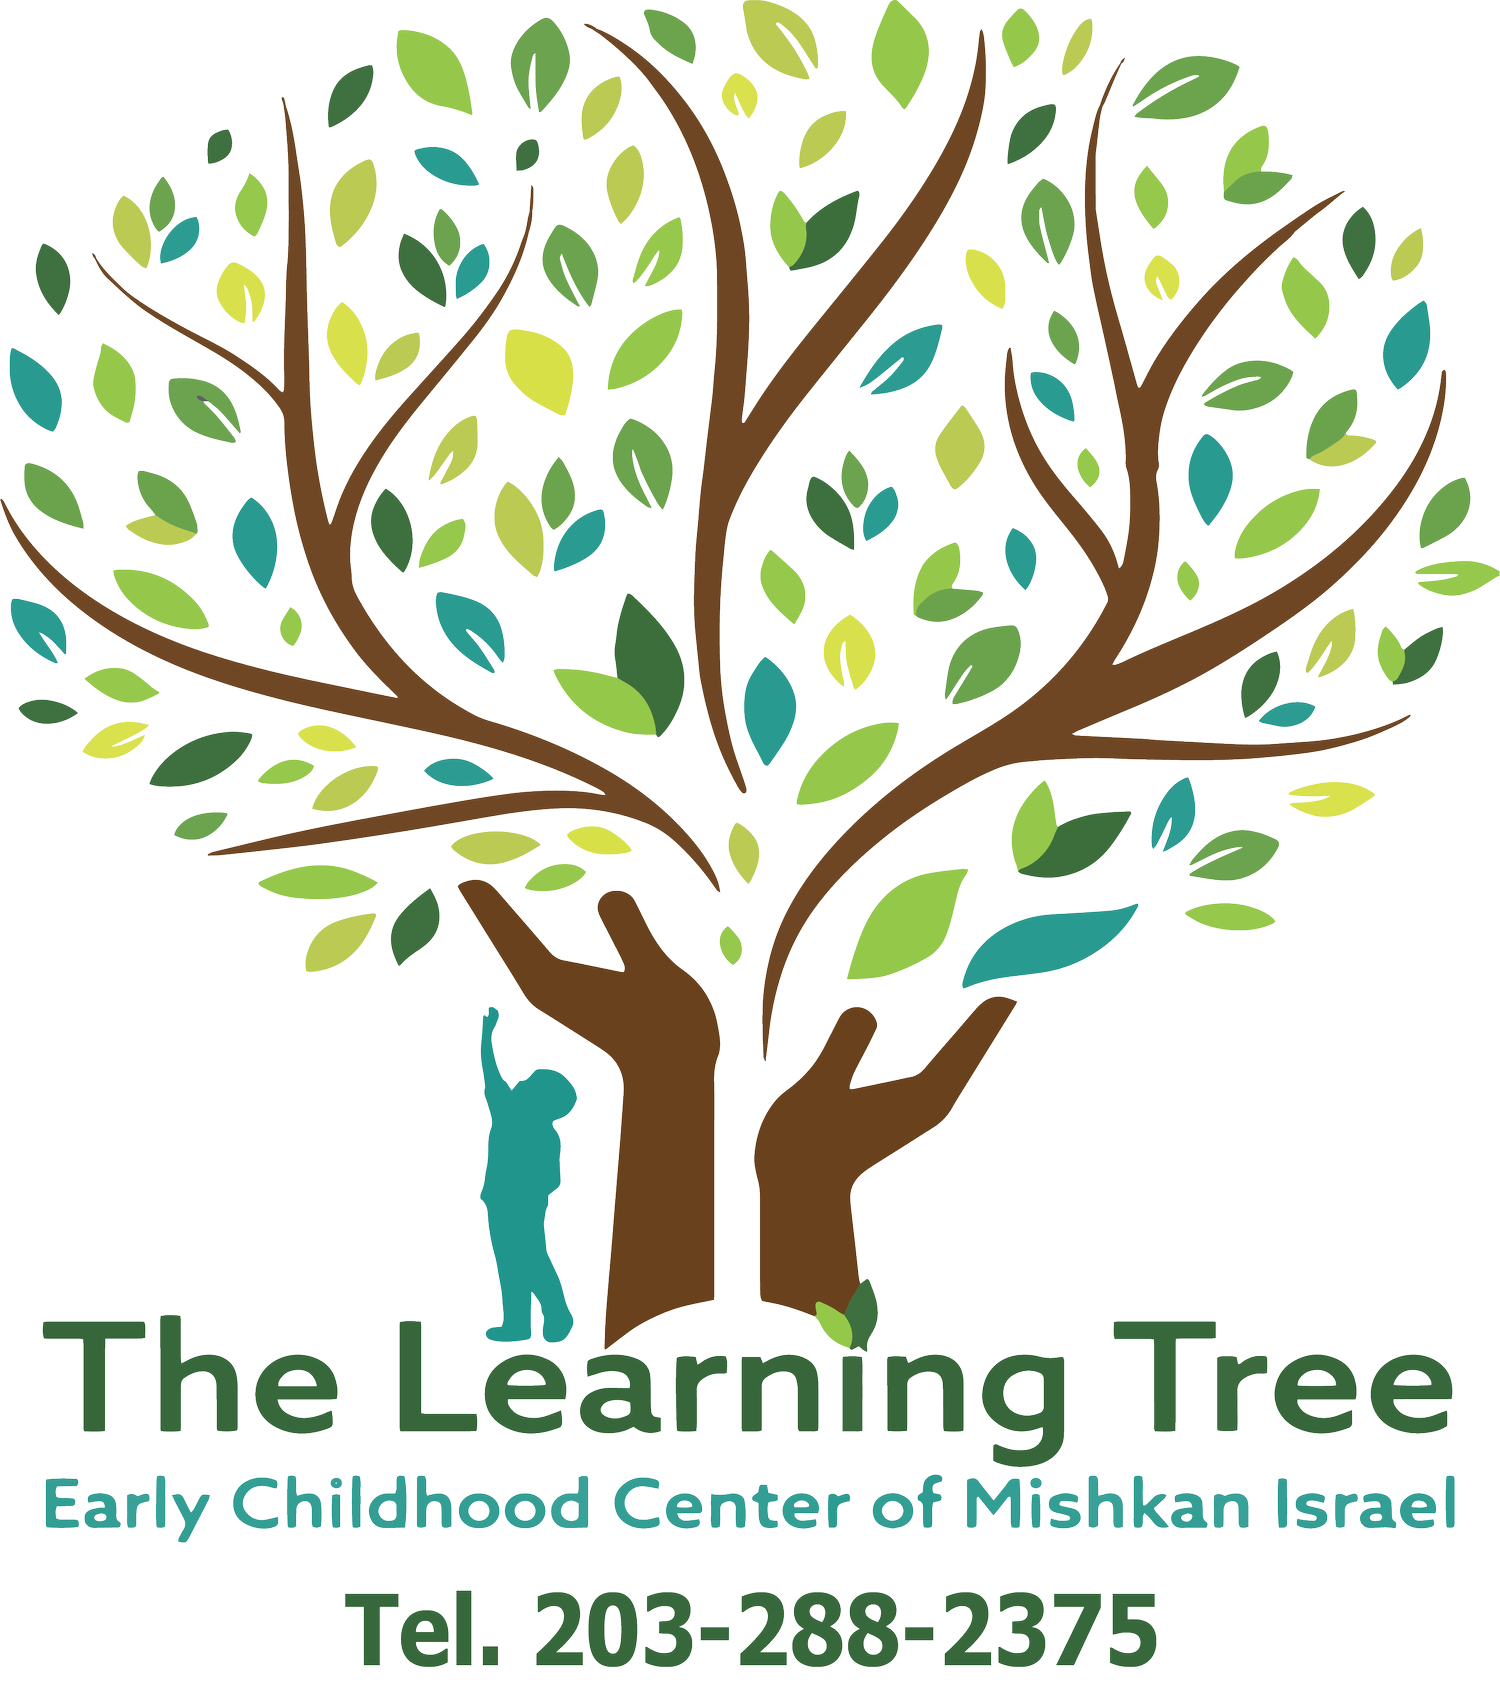 The Learning Tree Early Childhood Center of Mishkan Isarael